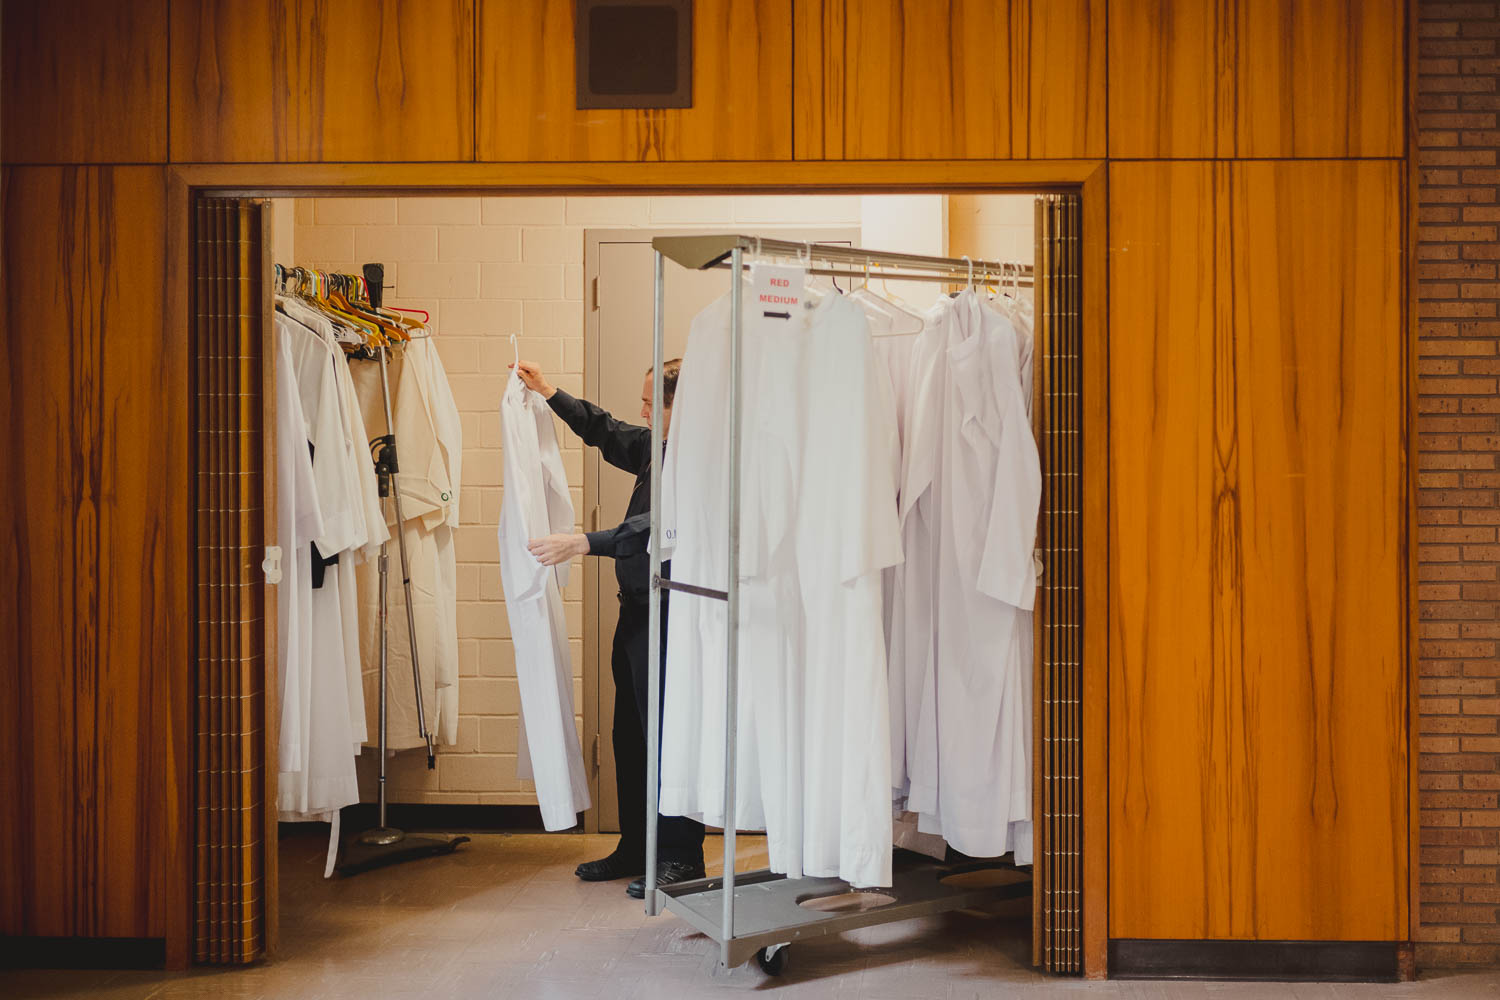 A priest selects the right garment before the wedding ceremony commences at Immaculate Conception Chapel at Oblate School of Theology -Philip Thomas